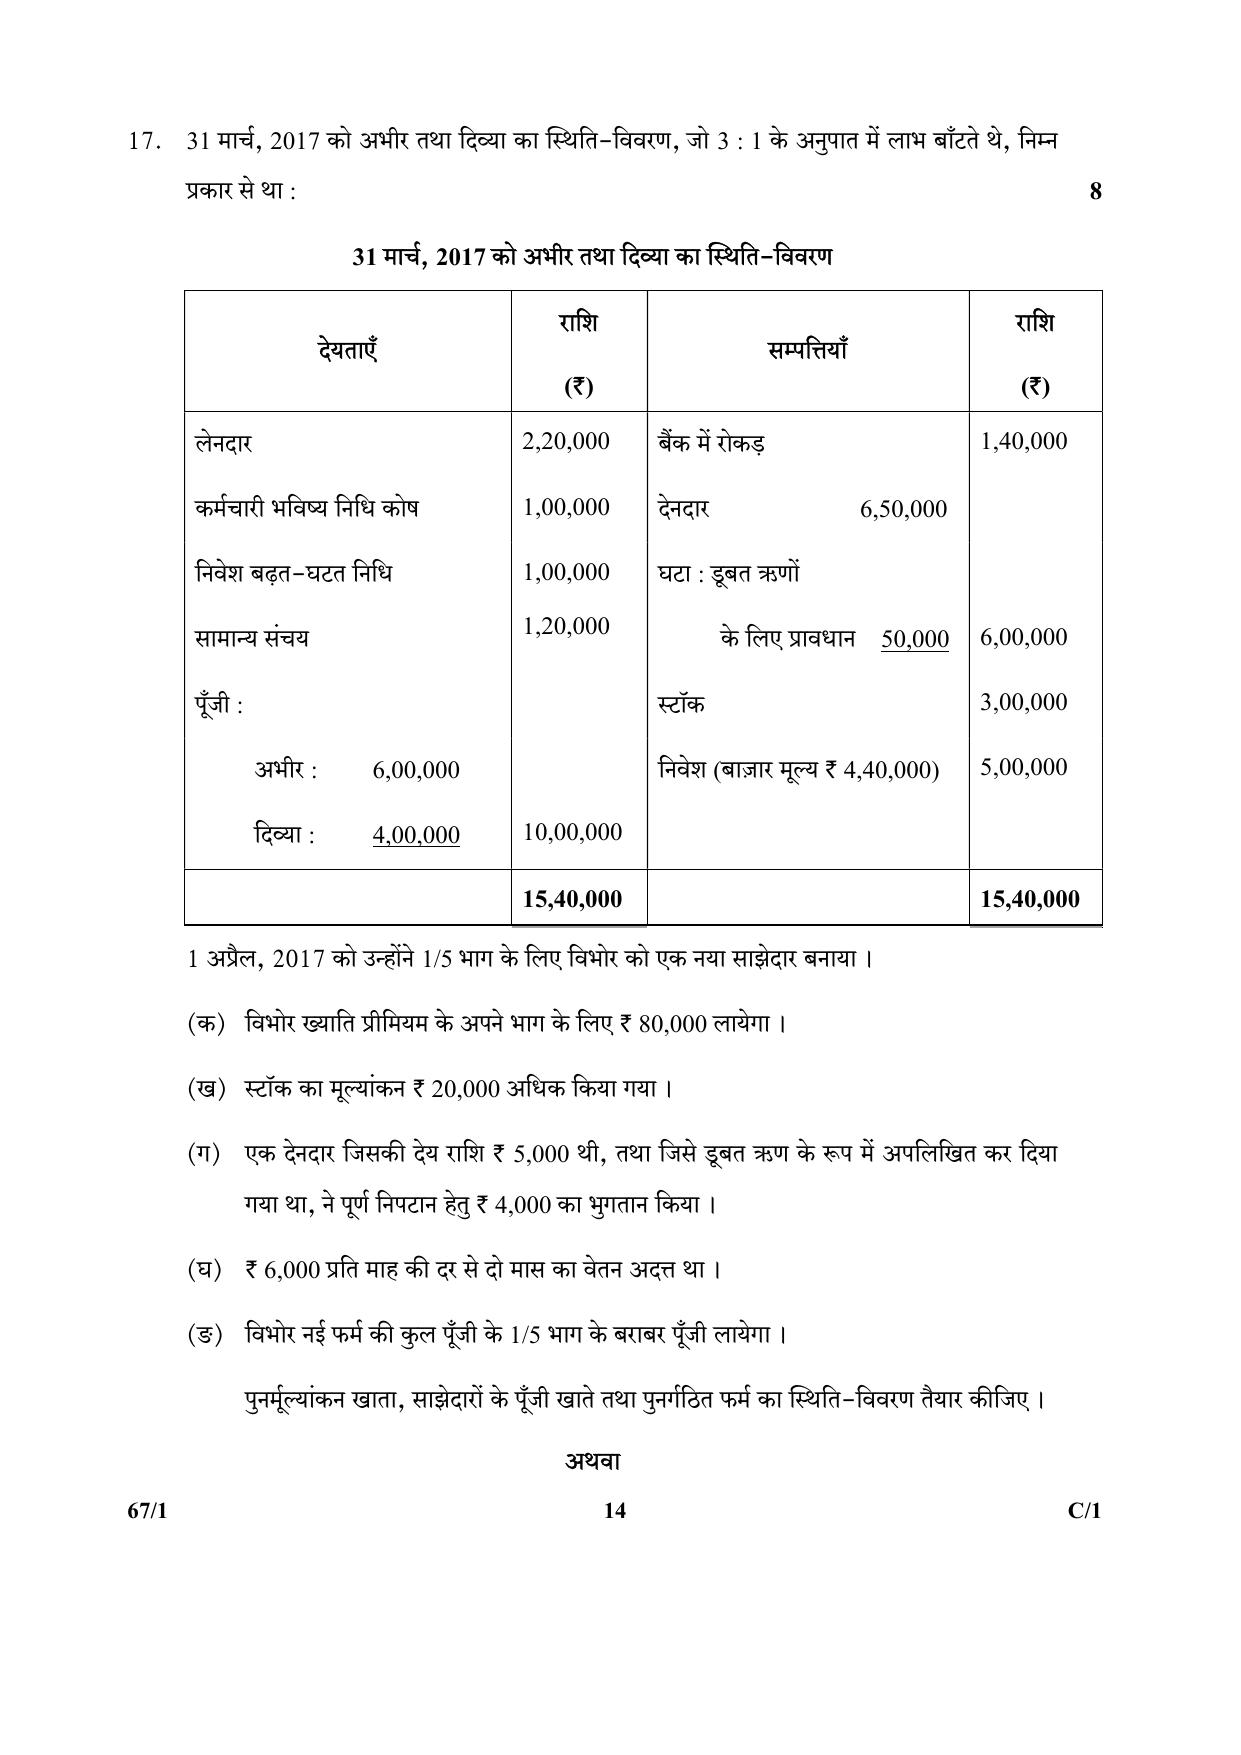 CBSE Class 12 67-1  (Accountancy) 2018 Compartment Question Paper - Page 14